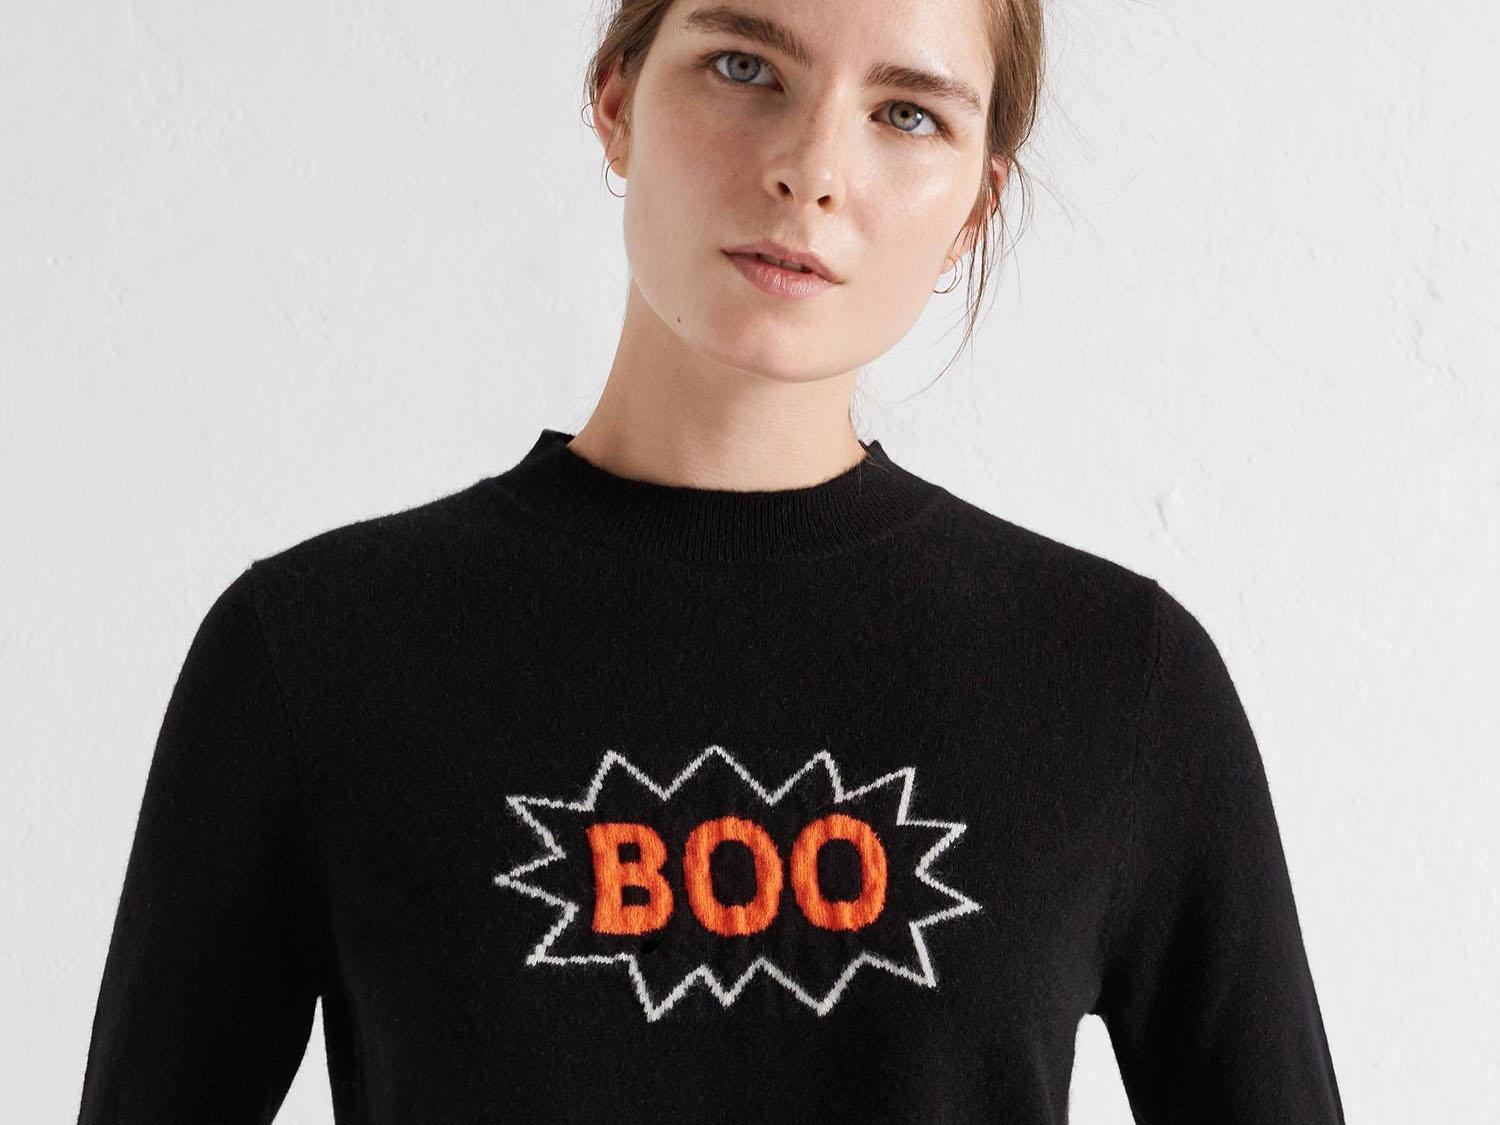 Black Boo Slogan Cashmere Blend Sweater from Chinti & Parker, £275